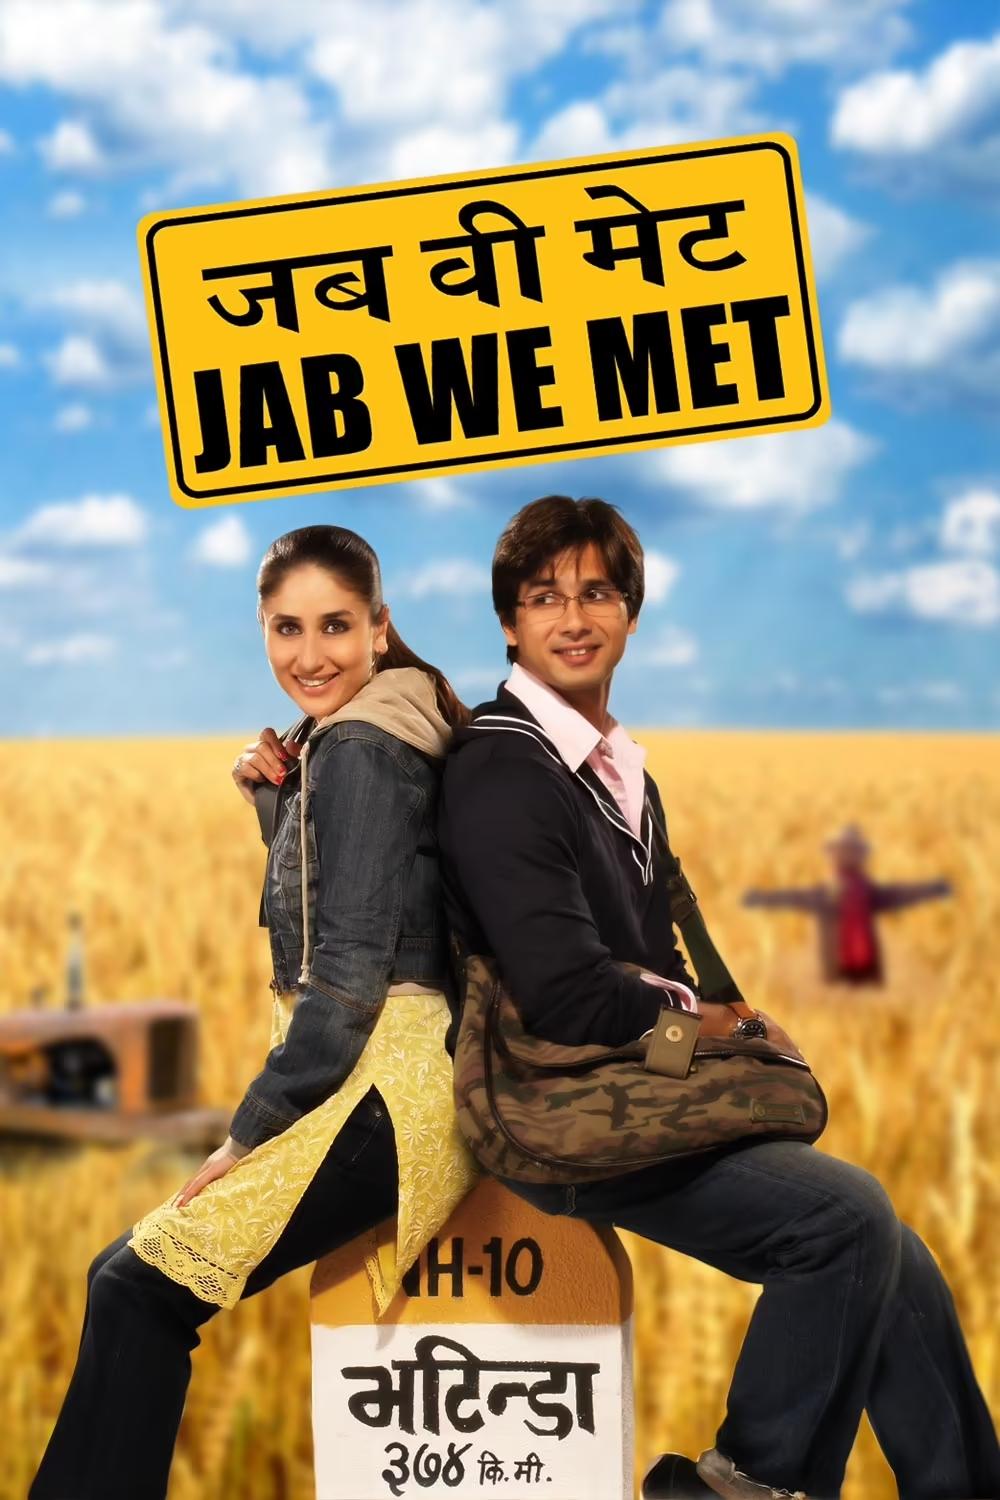 Jab We Met is a heartwarming and entertaining romantic comedy that follows the journey of two strangers, Geet (Kareena Kapoor Khan) and Aditya (Shahid Kapoor). Directed by Imtiaz Ali, Jab We Met explores the delightful encounters and adventures that unfold when their paths cross on a train journey.